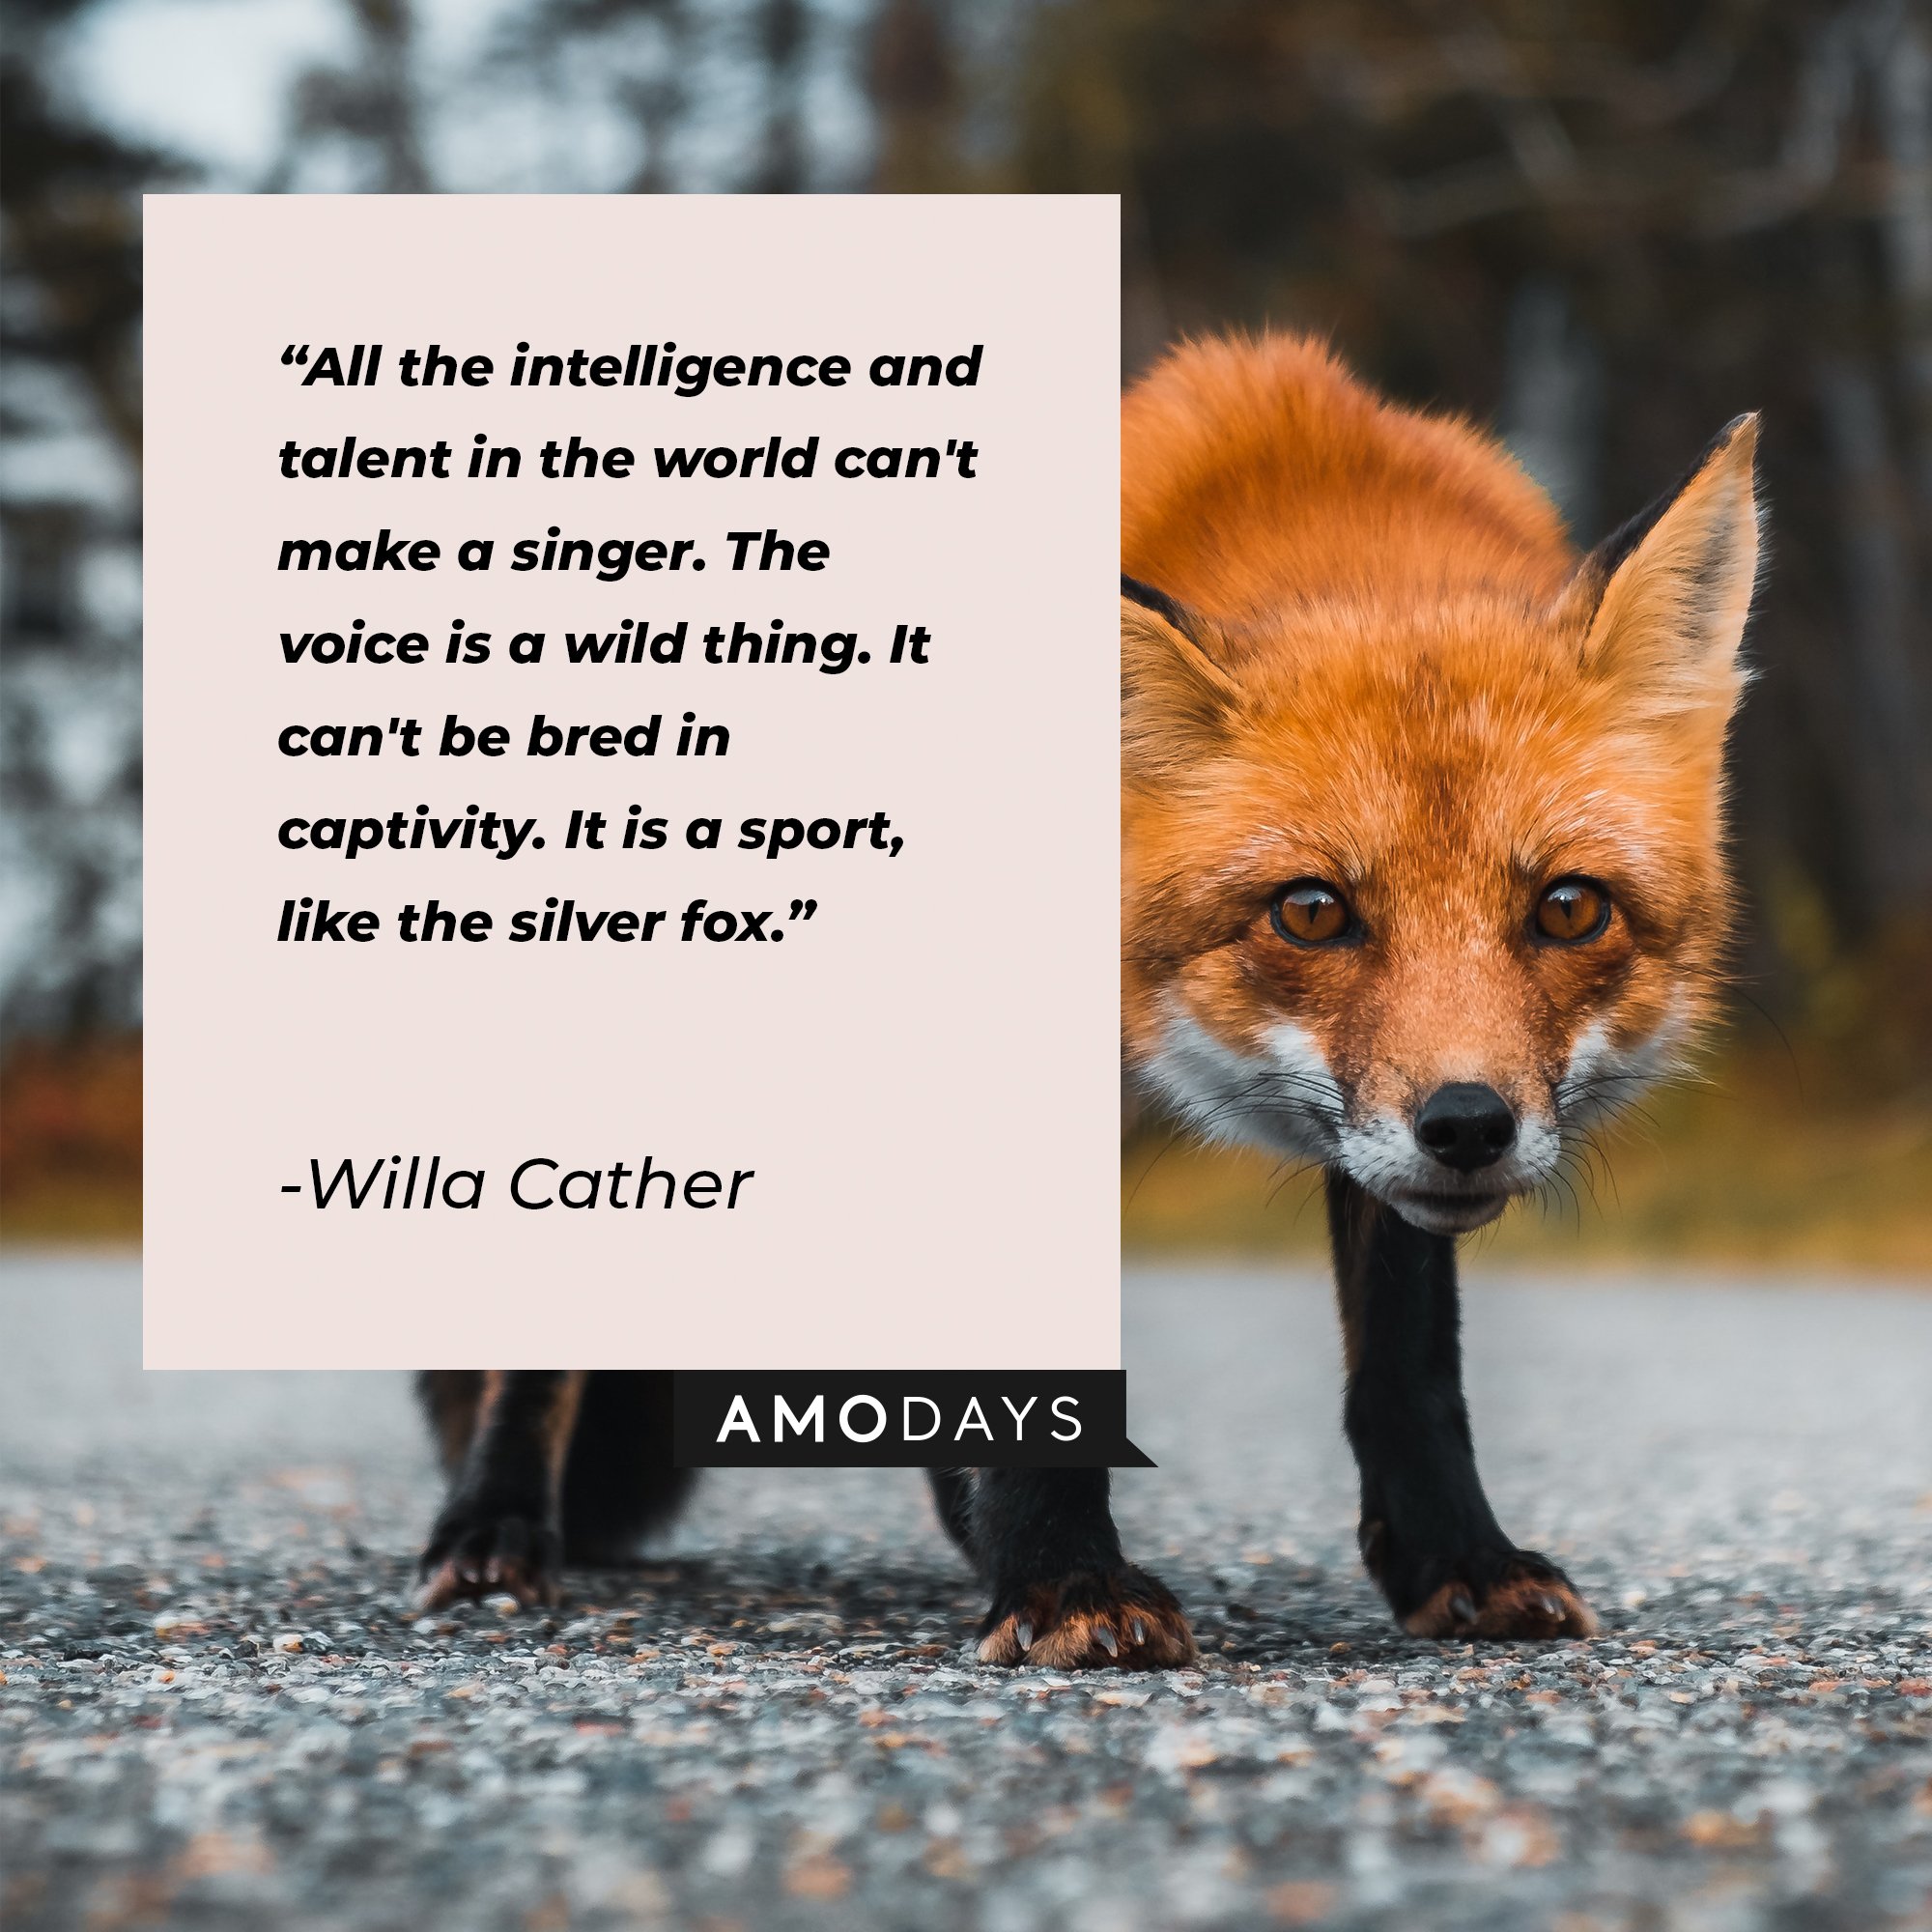 Willa Cather’s quotes: "All the intelligence and talent in the world can't make a singer. The voice is a wild thing. It can't be bred in captivity. It is a sport, like the silver fox." | Image: AmoDays